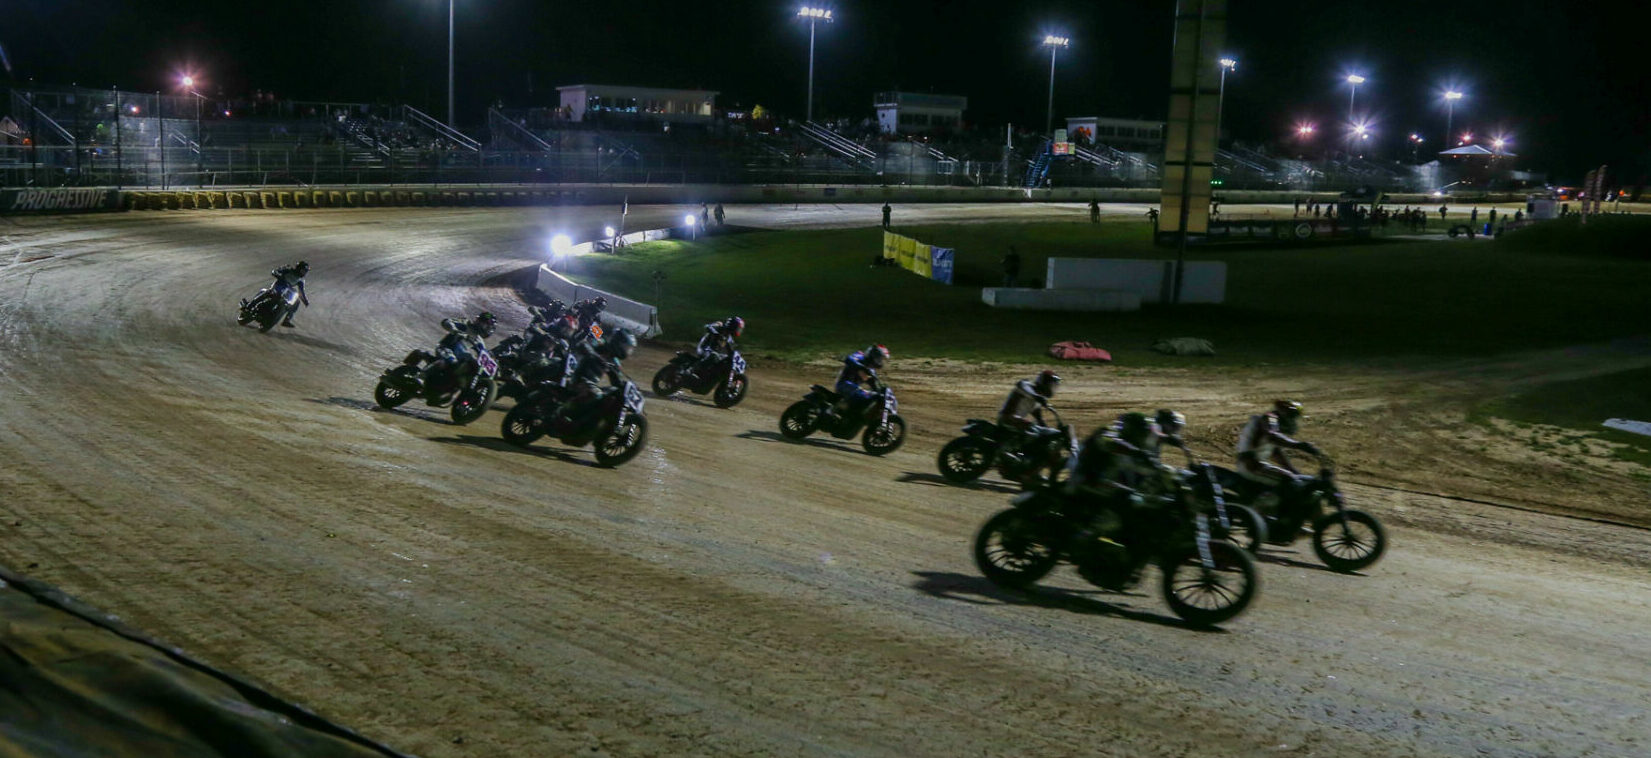 Action from the AFT SuperTwins Main Event at New York Short Track I in 2021. Photo by Scott Hunter, courtesy AFT.